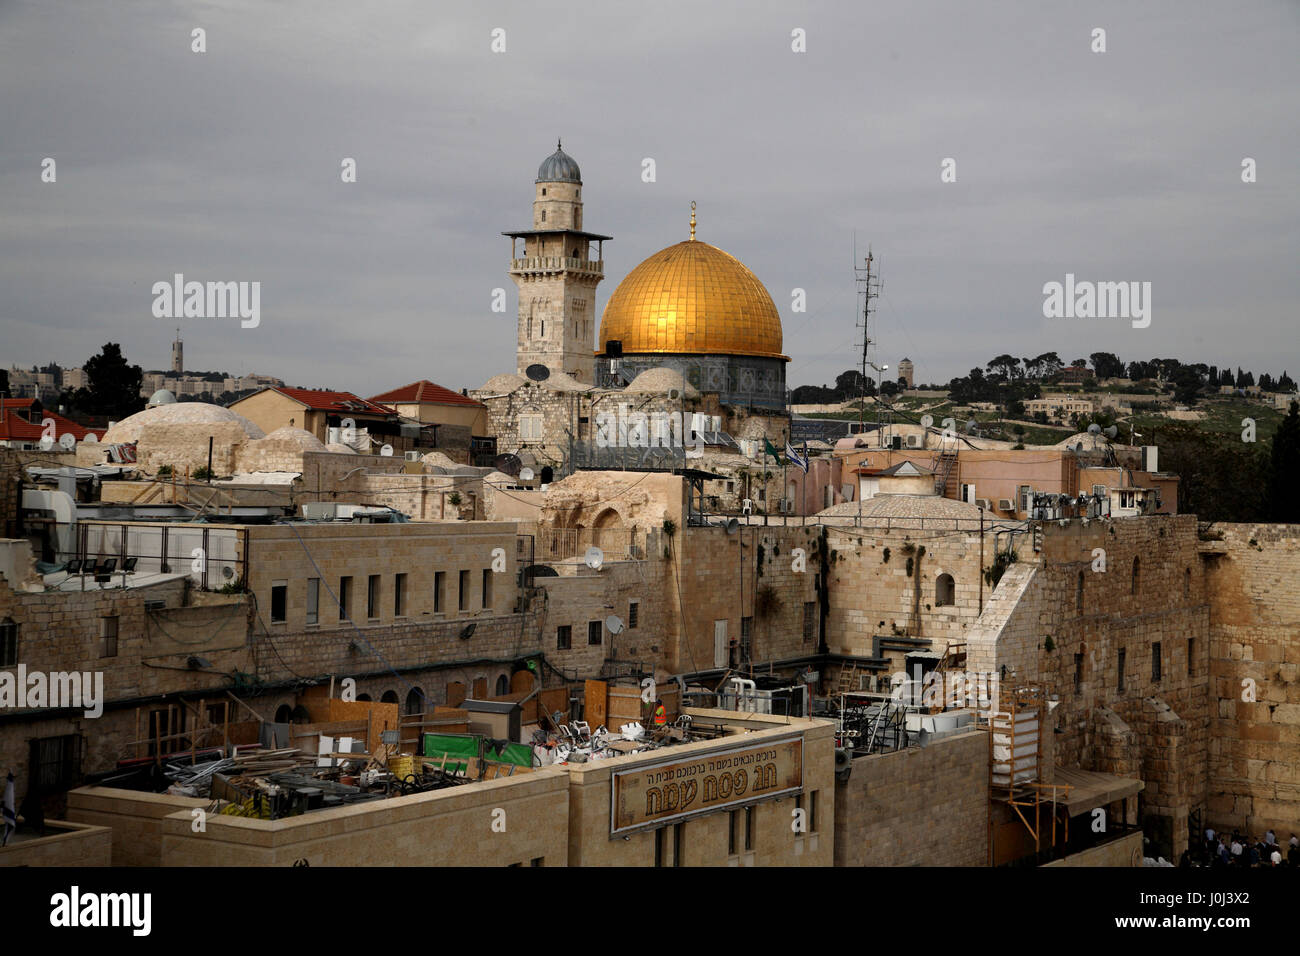 The Dome of the Rock with it's golden dome on the Temple Mount on a partly cloudy day. The Old City of Jerusalem. Israel. Stock Photo